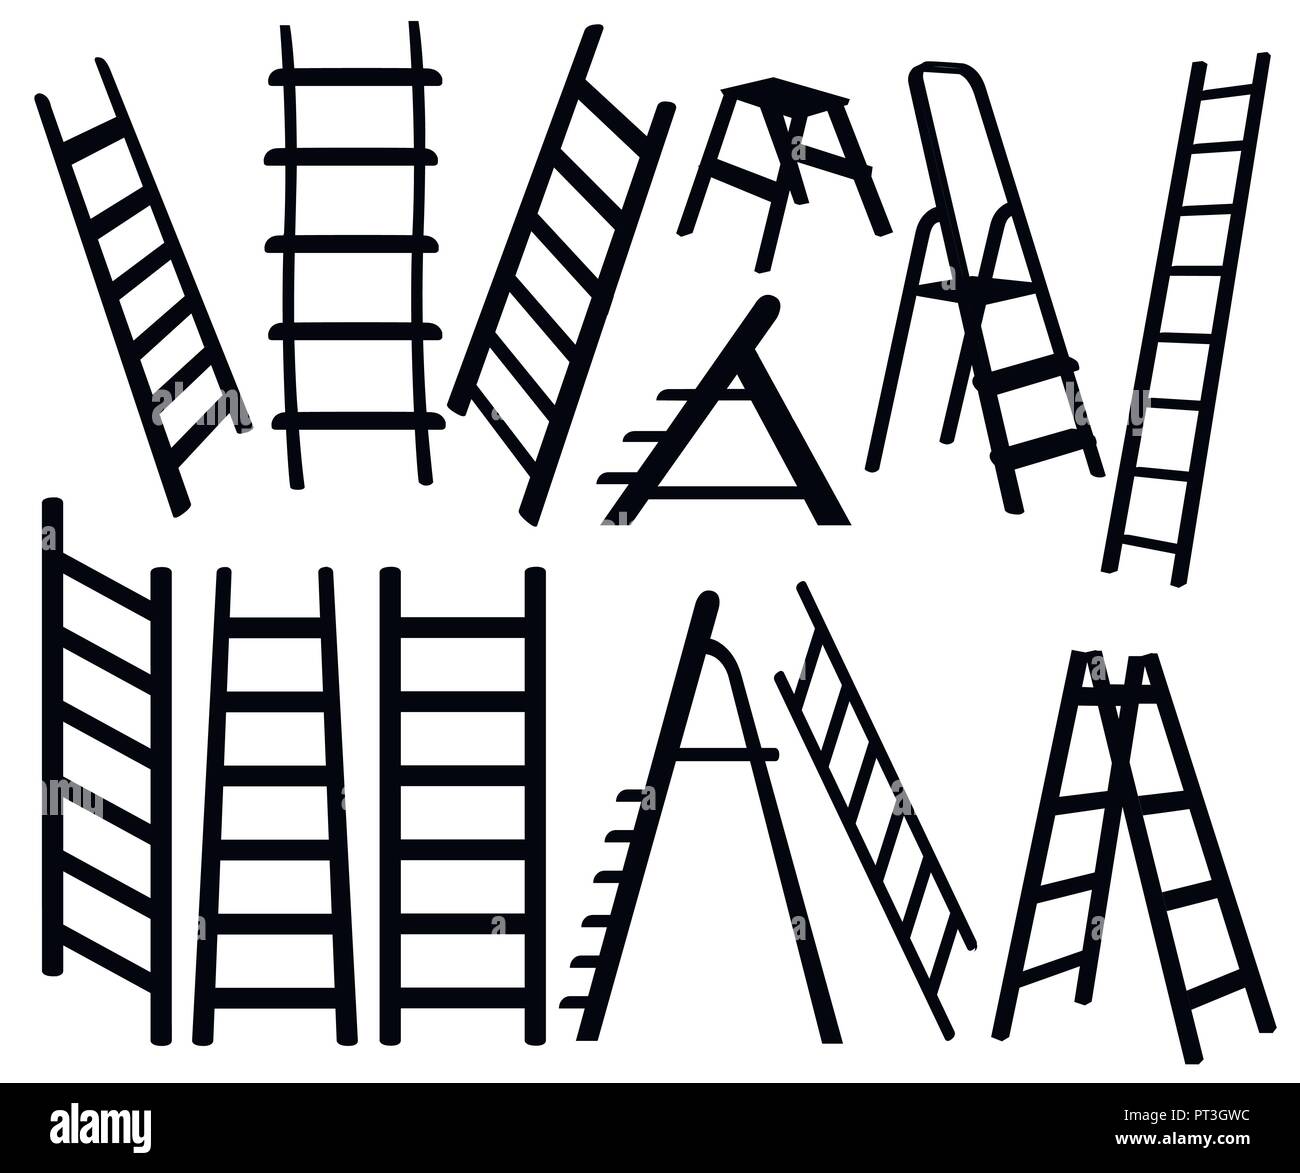 Black silhouette. Collection of metal ladders. Different types of stepladders. Flat vector illustration isolated on white background. Stock Vector